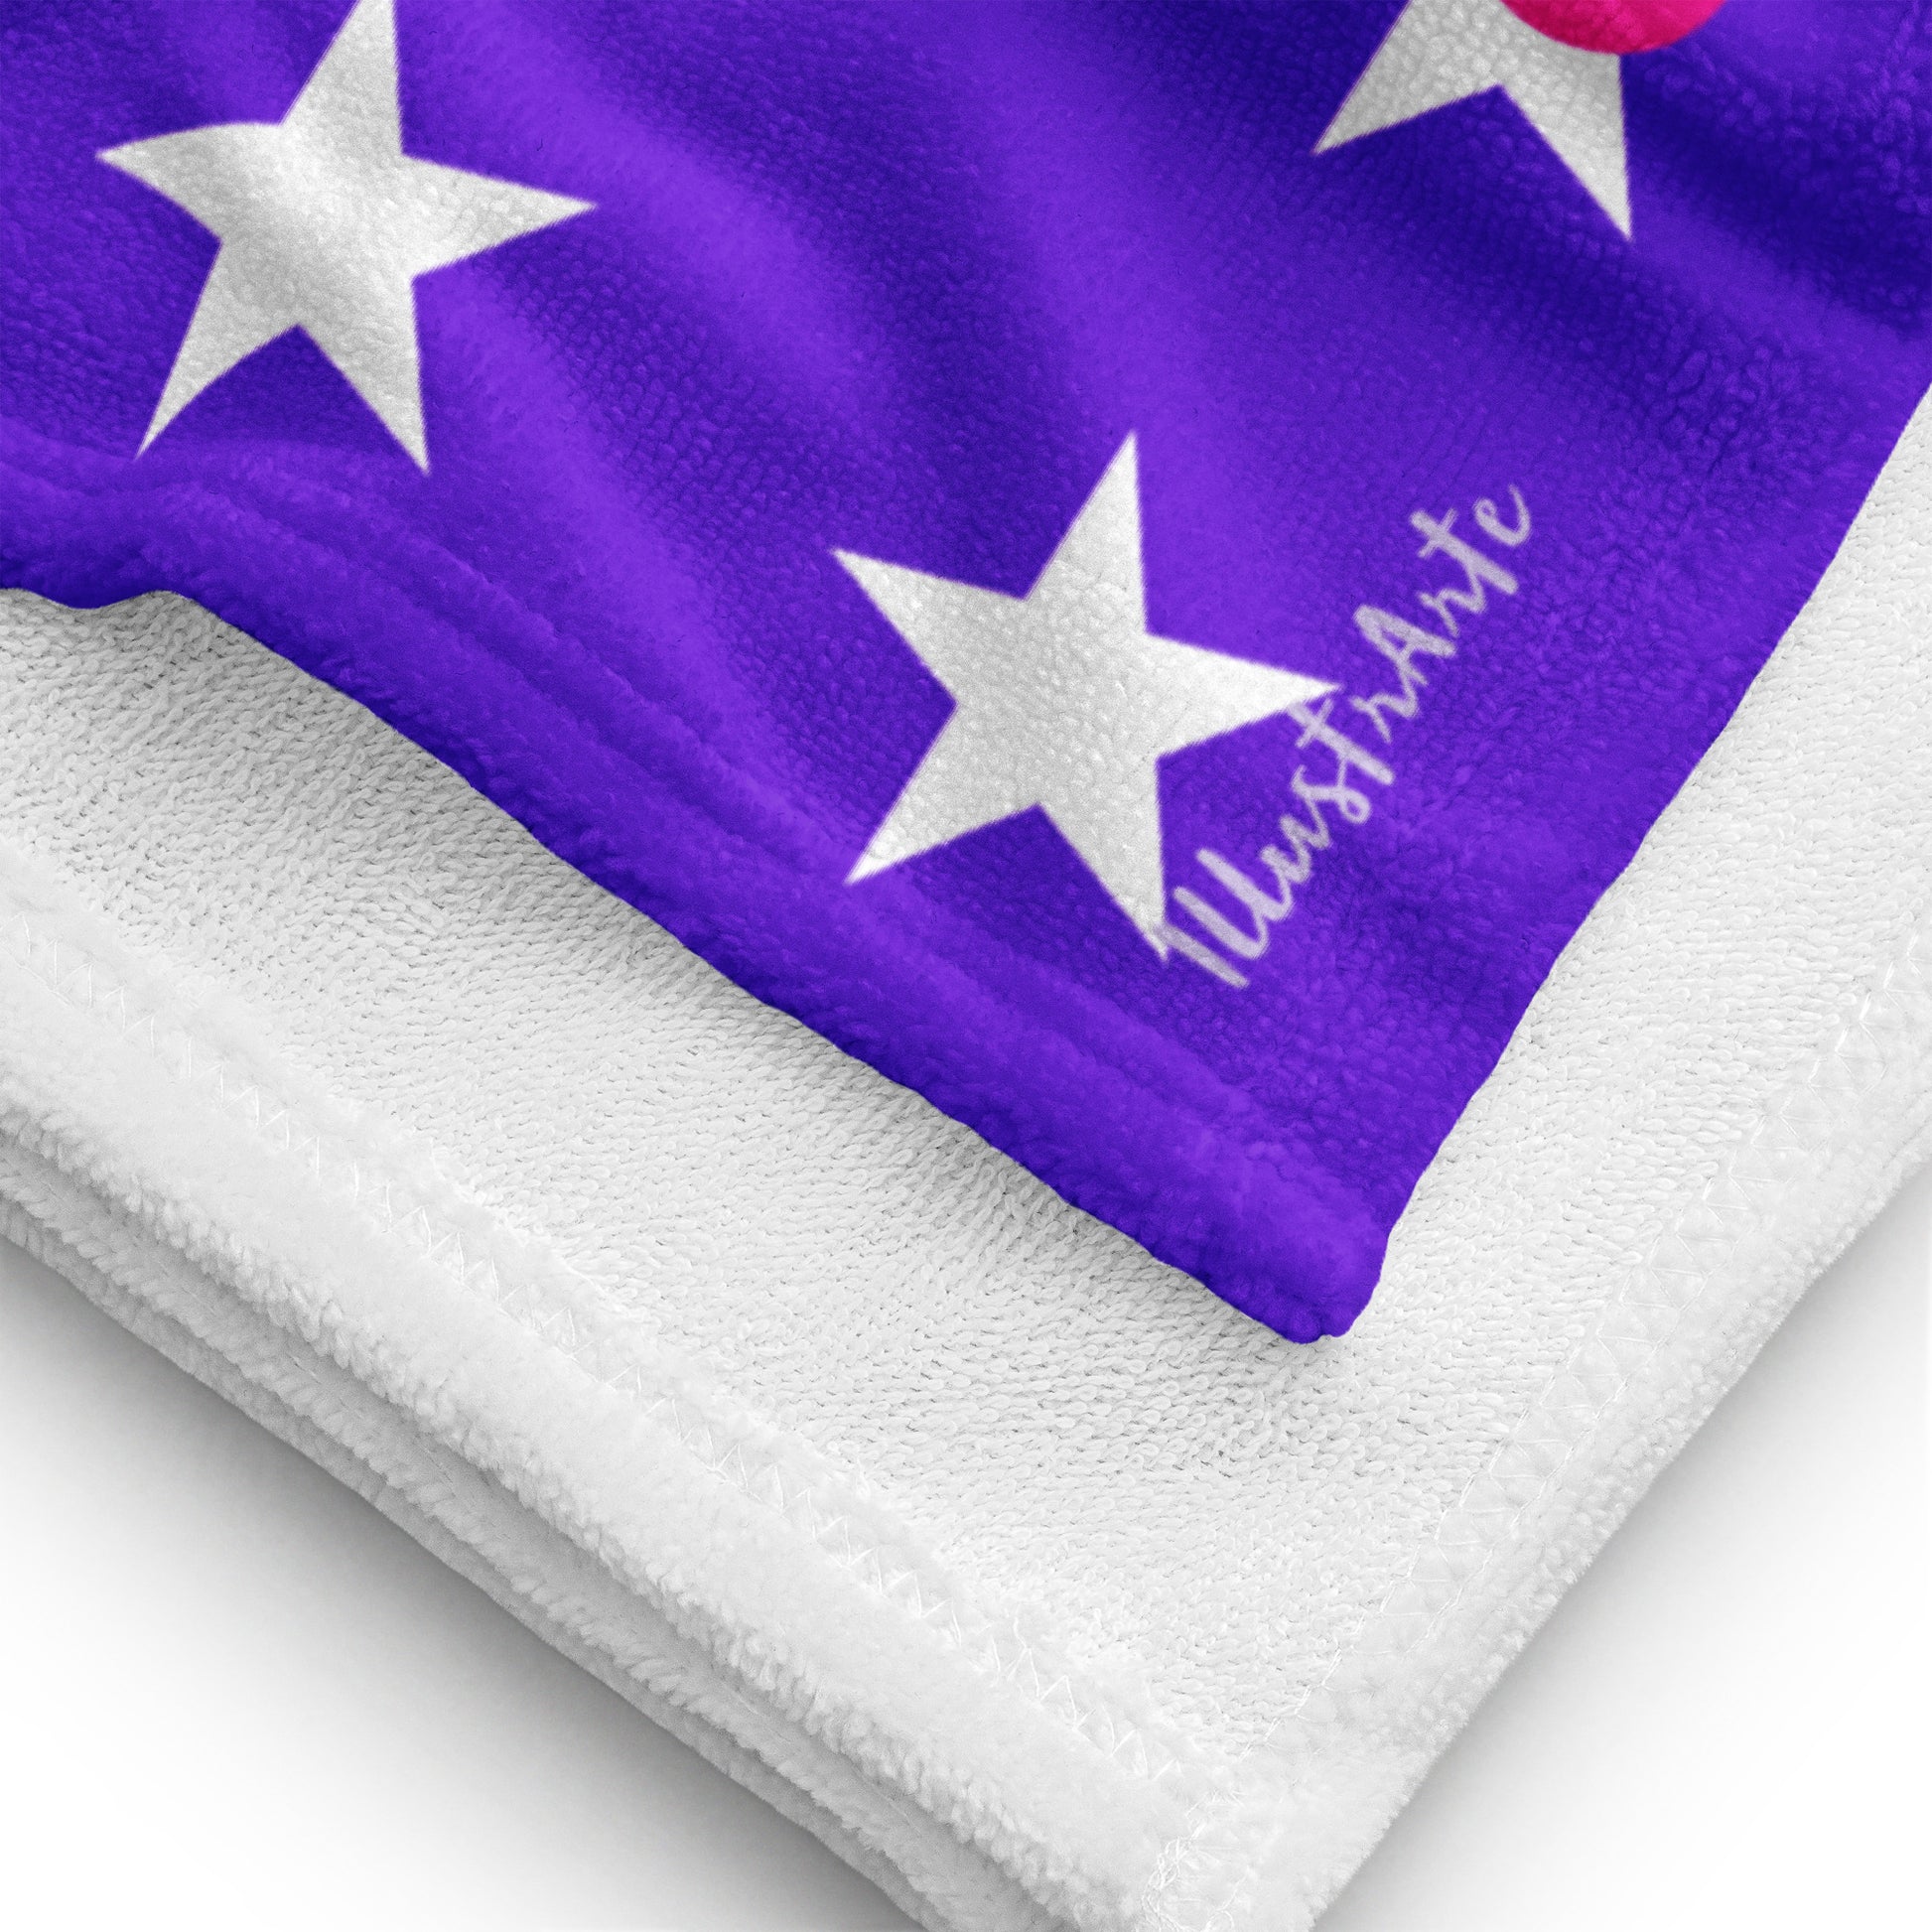 a purple and white towel with white stars on it